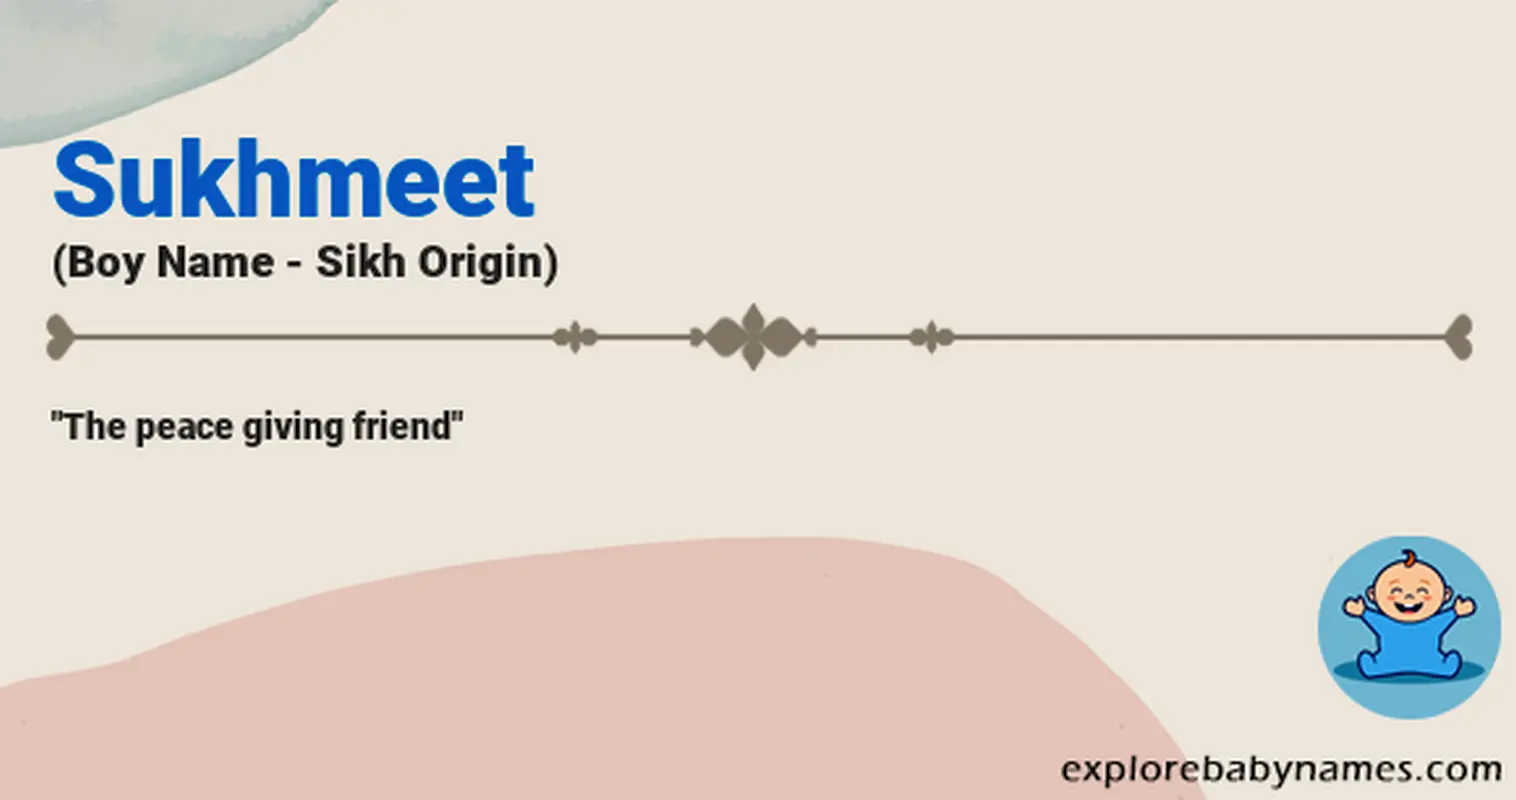 Meaning of Sukhmeet